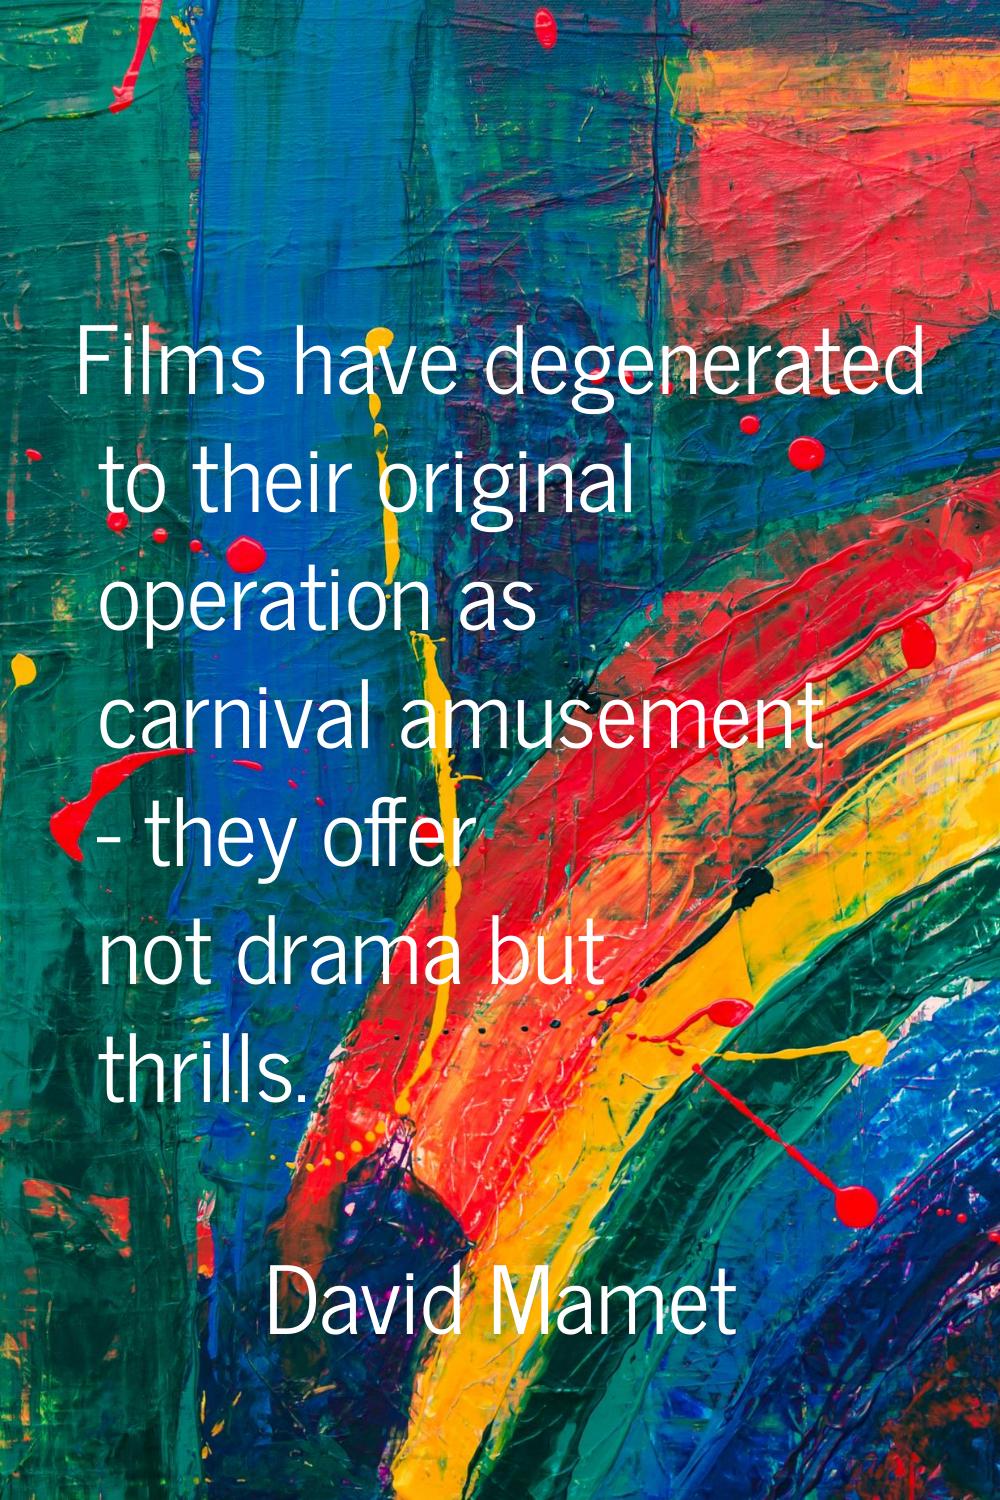 Films have degenerated to their original operation as carnival amusement - they offer not drama but